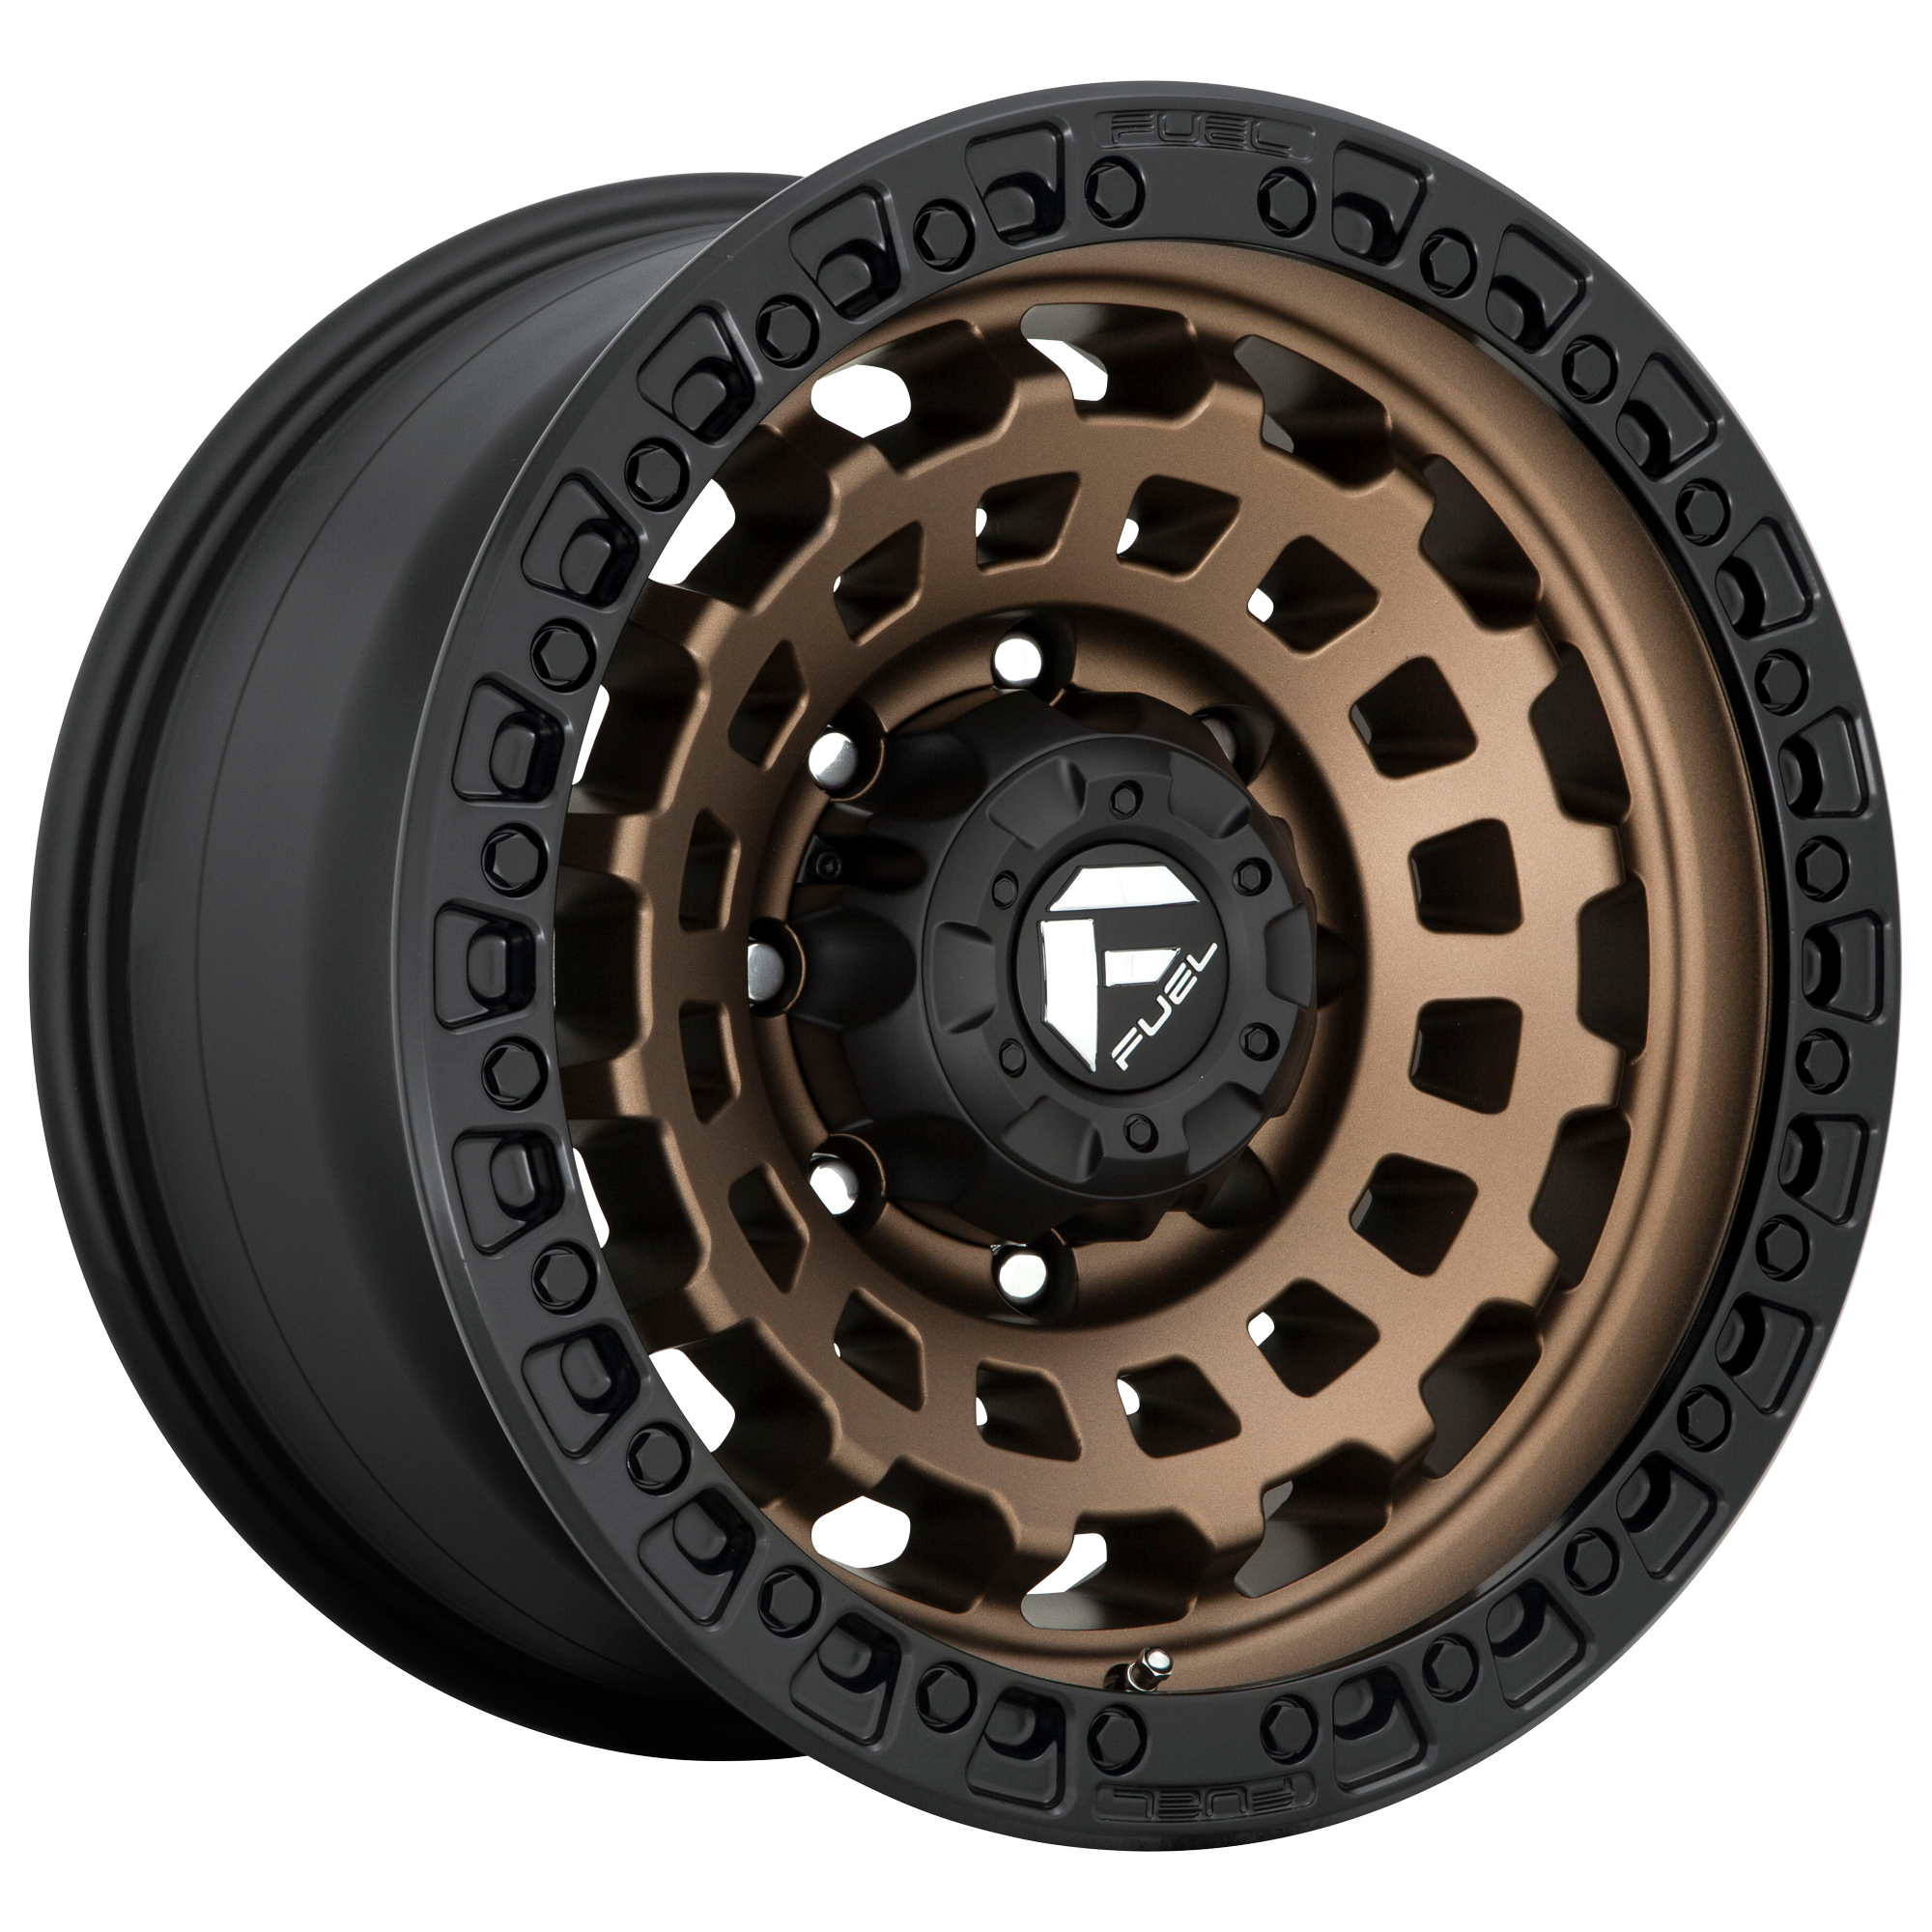 ZEPHYR 20x9 5x150.00 MATTE BRONZE BLACK BEAD RING (20 mm) - Tires and Engine Performance